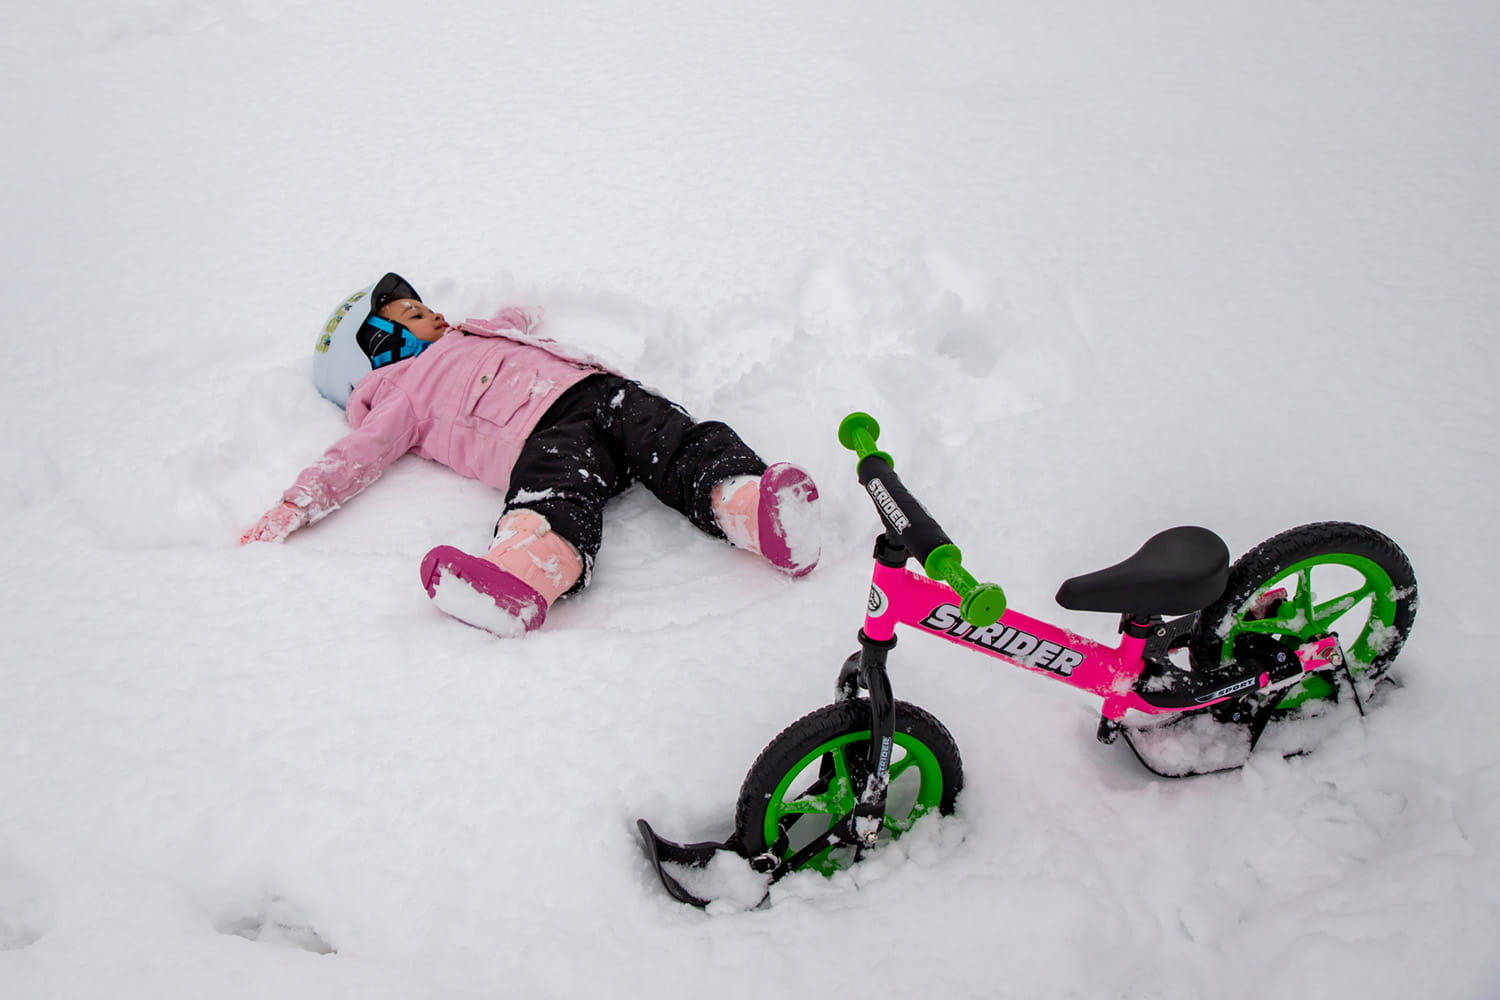 A child makes a snow angel next to a pink Strider bike with snow skis attached